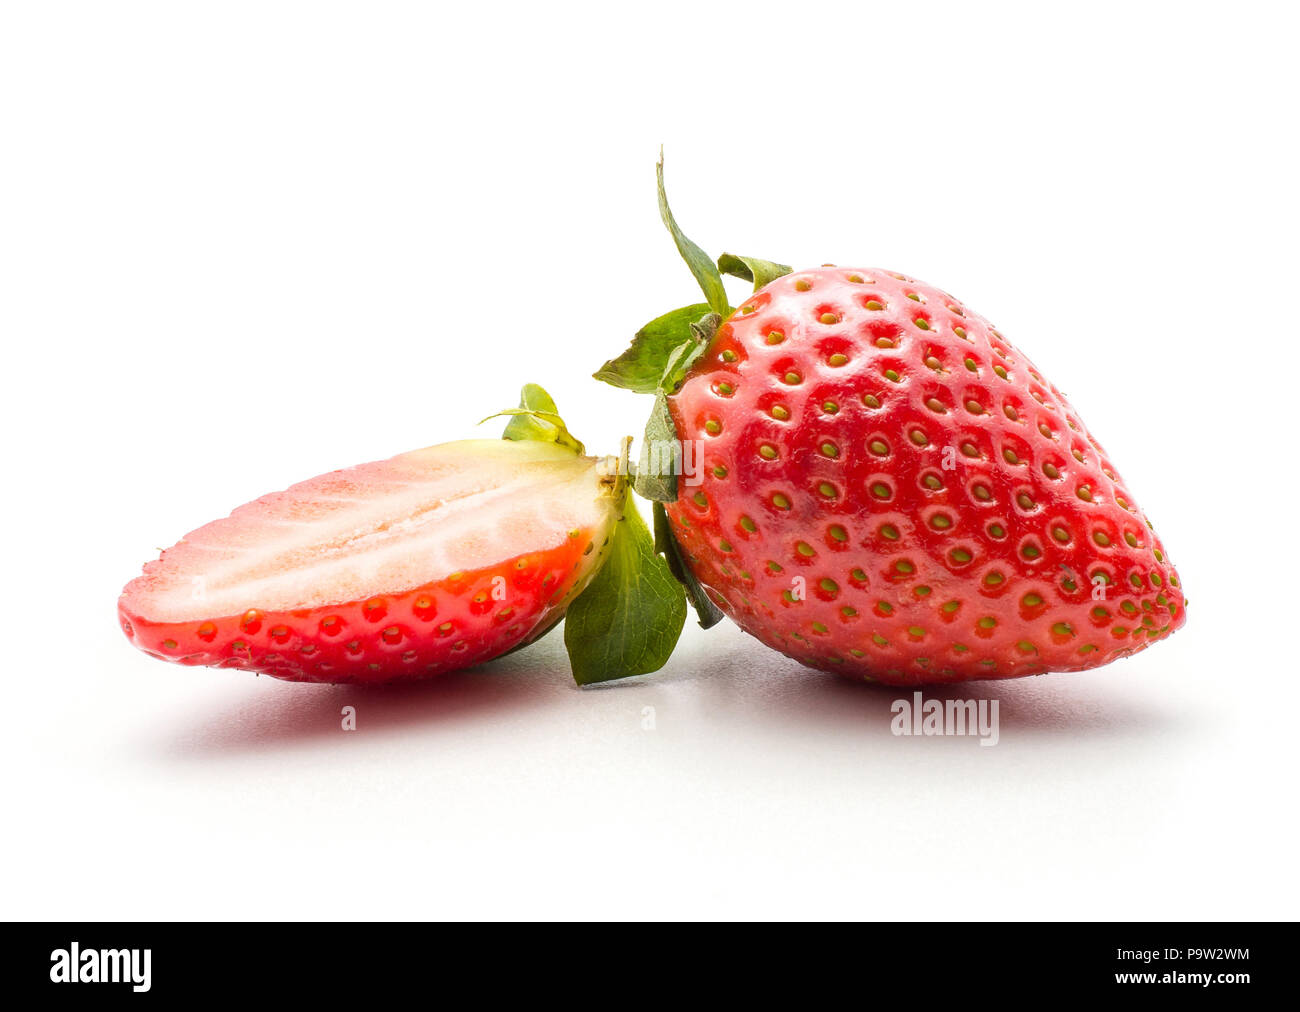 Ripe garden strawberry and one half isolated on white background Stock Photo